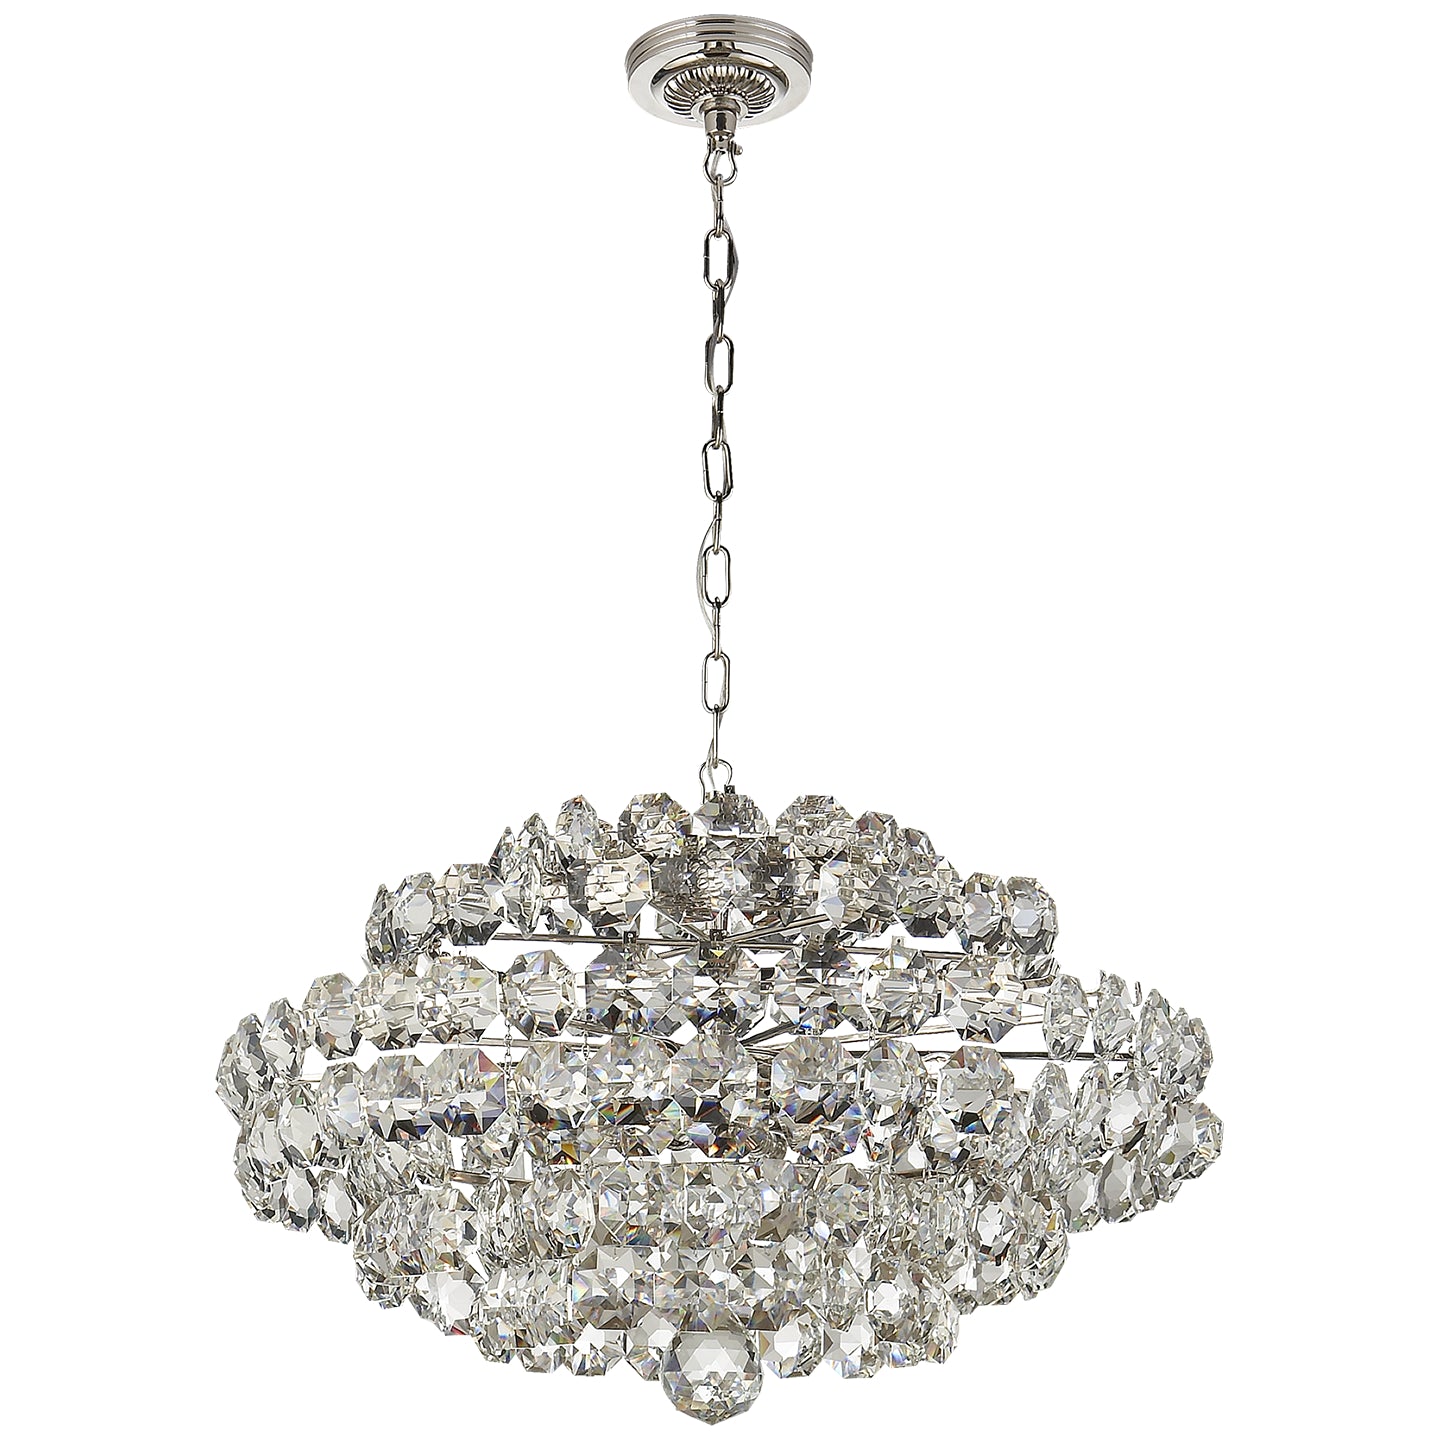 Load image into Gallery viewer, Visual Comfort Signature - ARN 5105PN-CG - 12 Light Chandelier - SANGER - Polished Nickel
